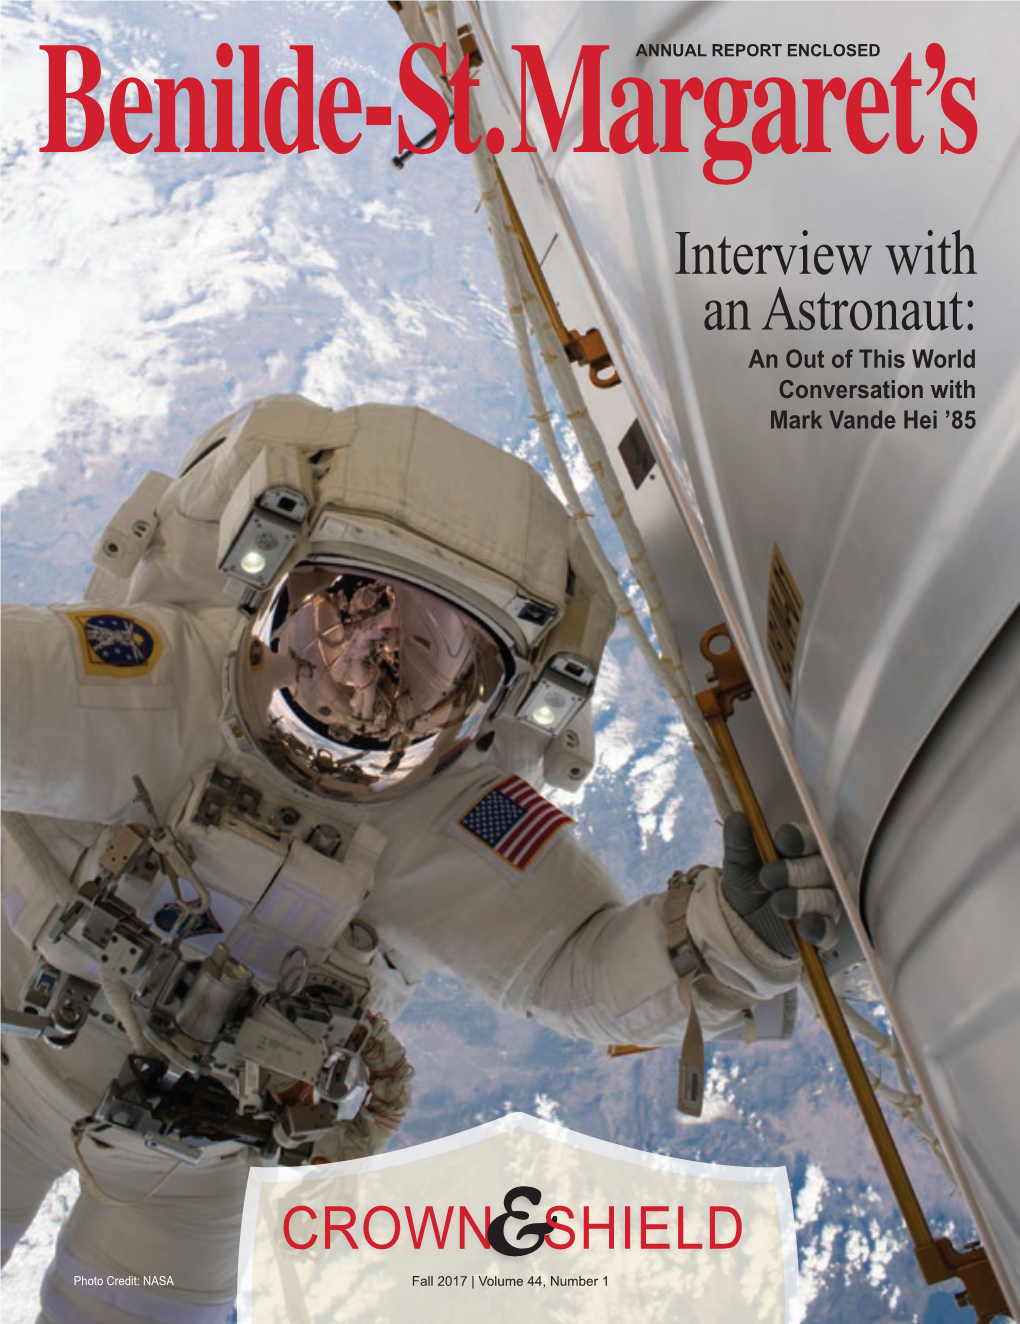 Interview with an Astronaut: an out of This World Conversation with Mark Vande Hei ’85